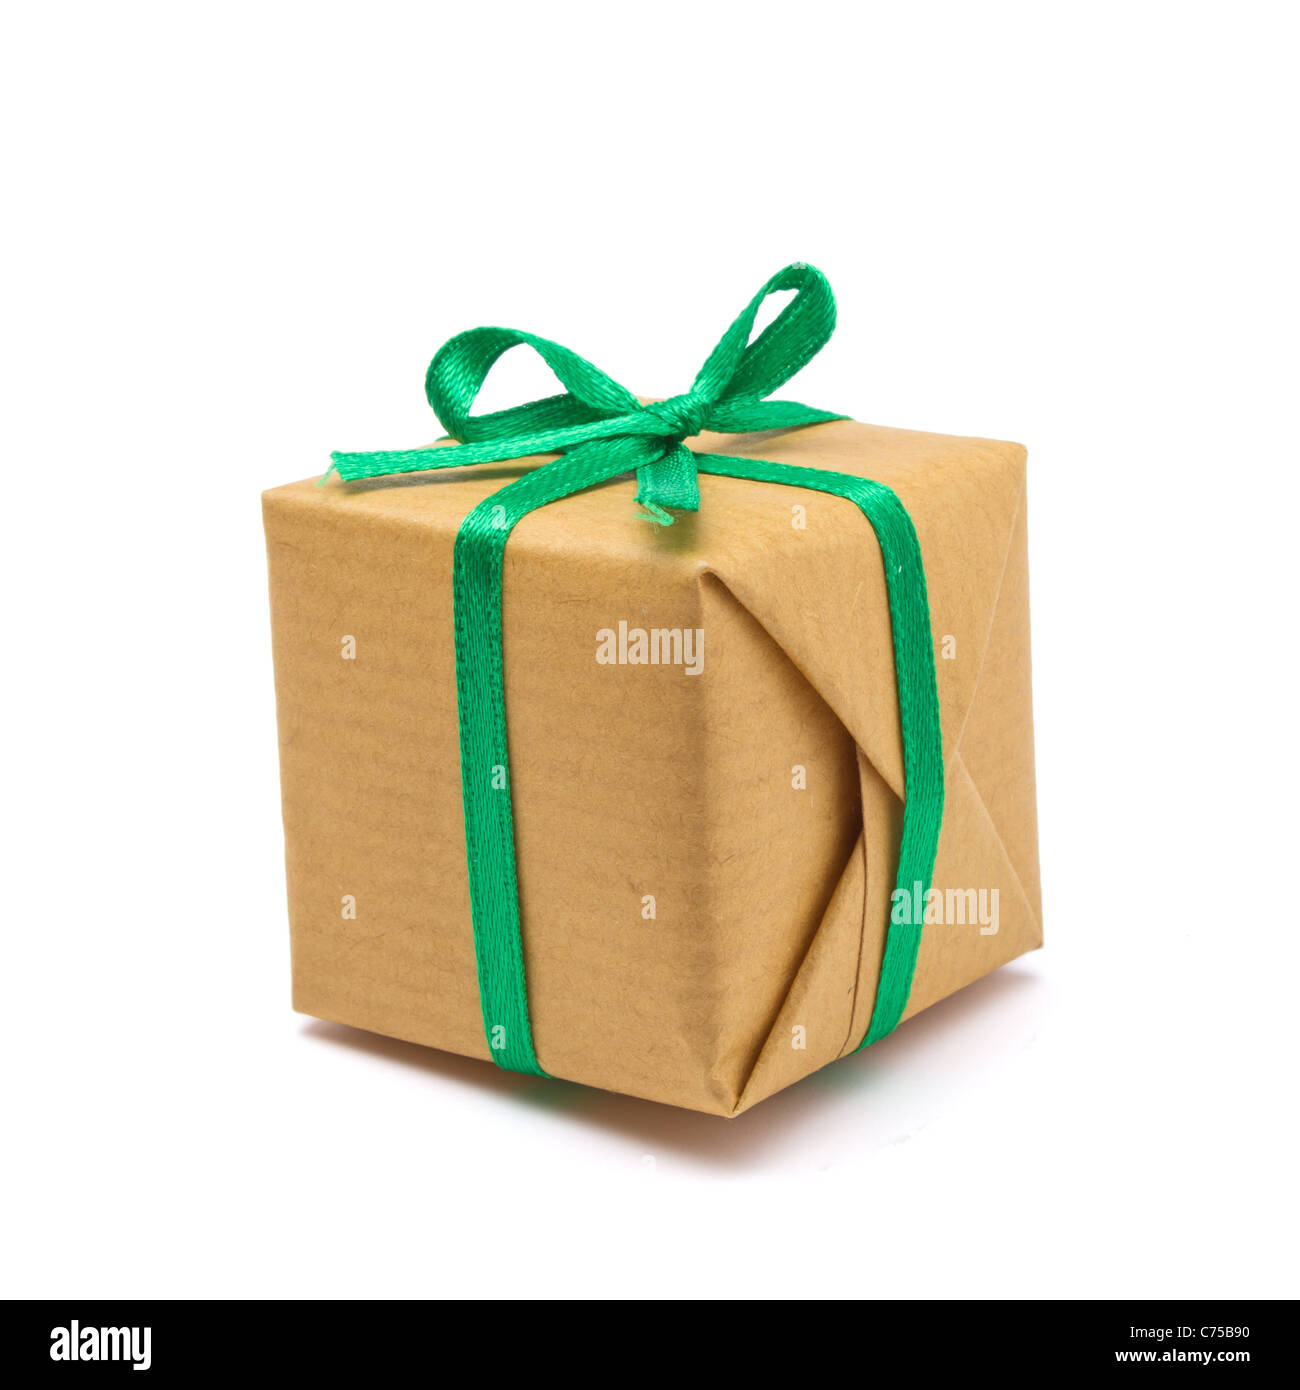 Single brown paper covered Gift box isolated on white background. Stock Photo